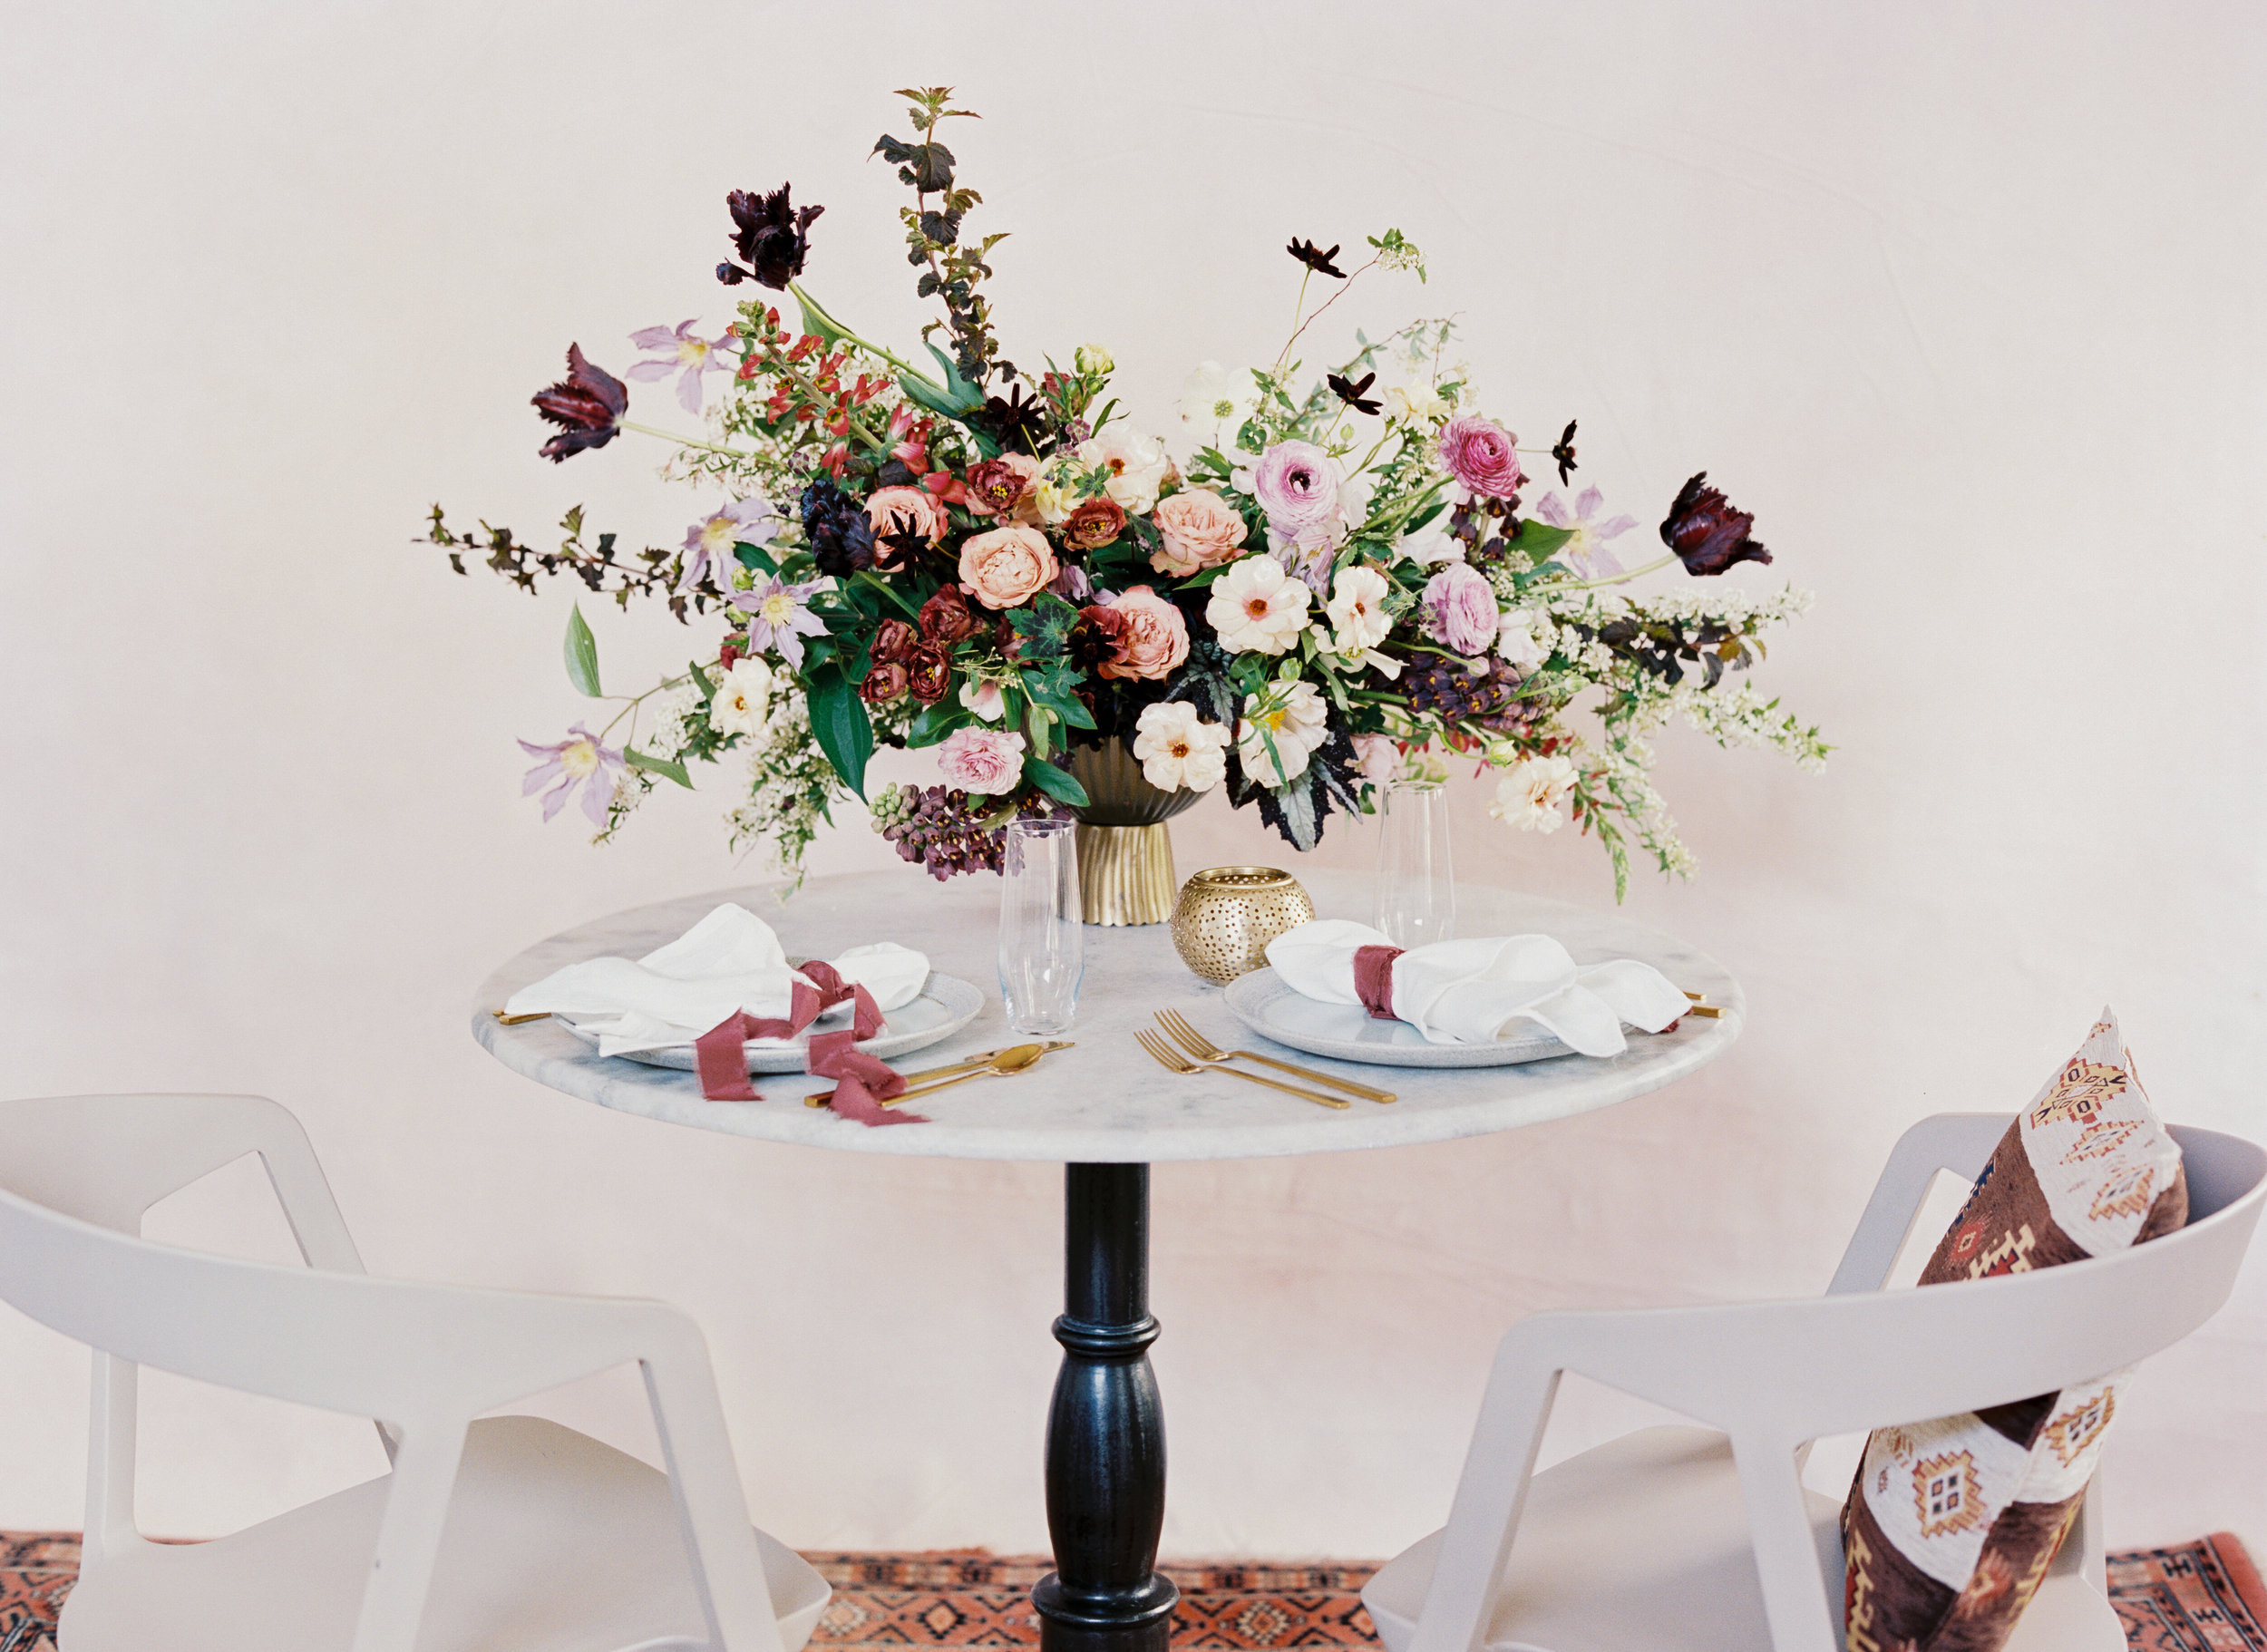 Moroccan rug, marble table, and flowers in shades of mauve, terra cotta, and eggplant. April wedding color palette by Nashville floral designer, Rosemary and Finch.